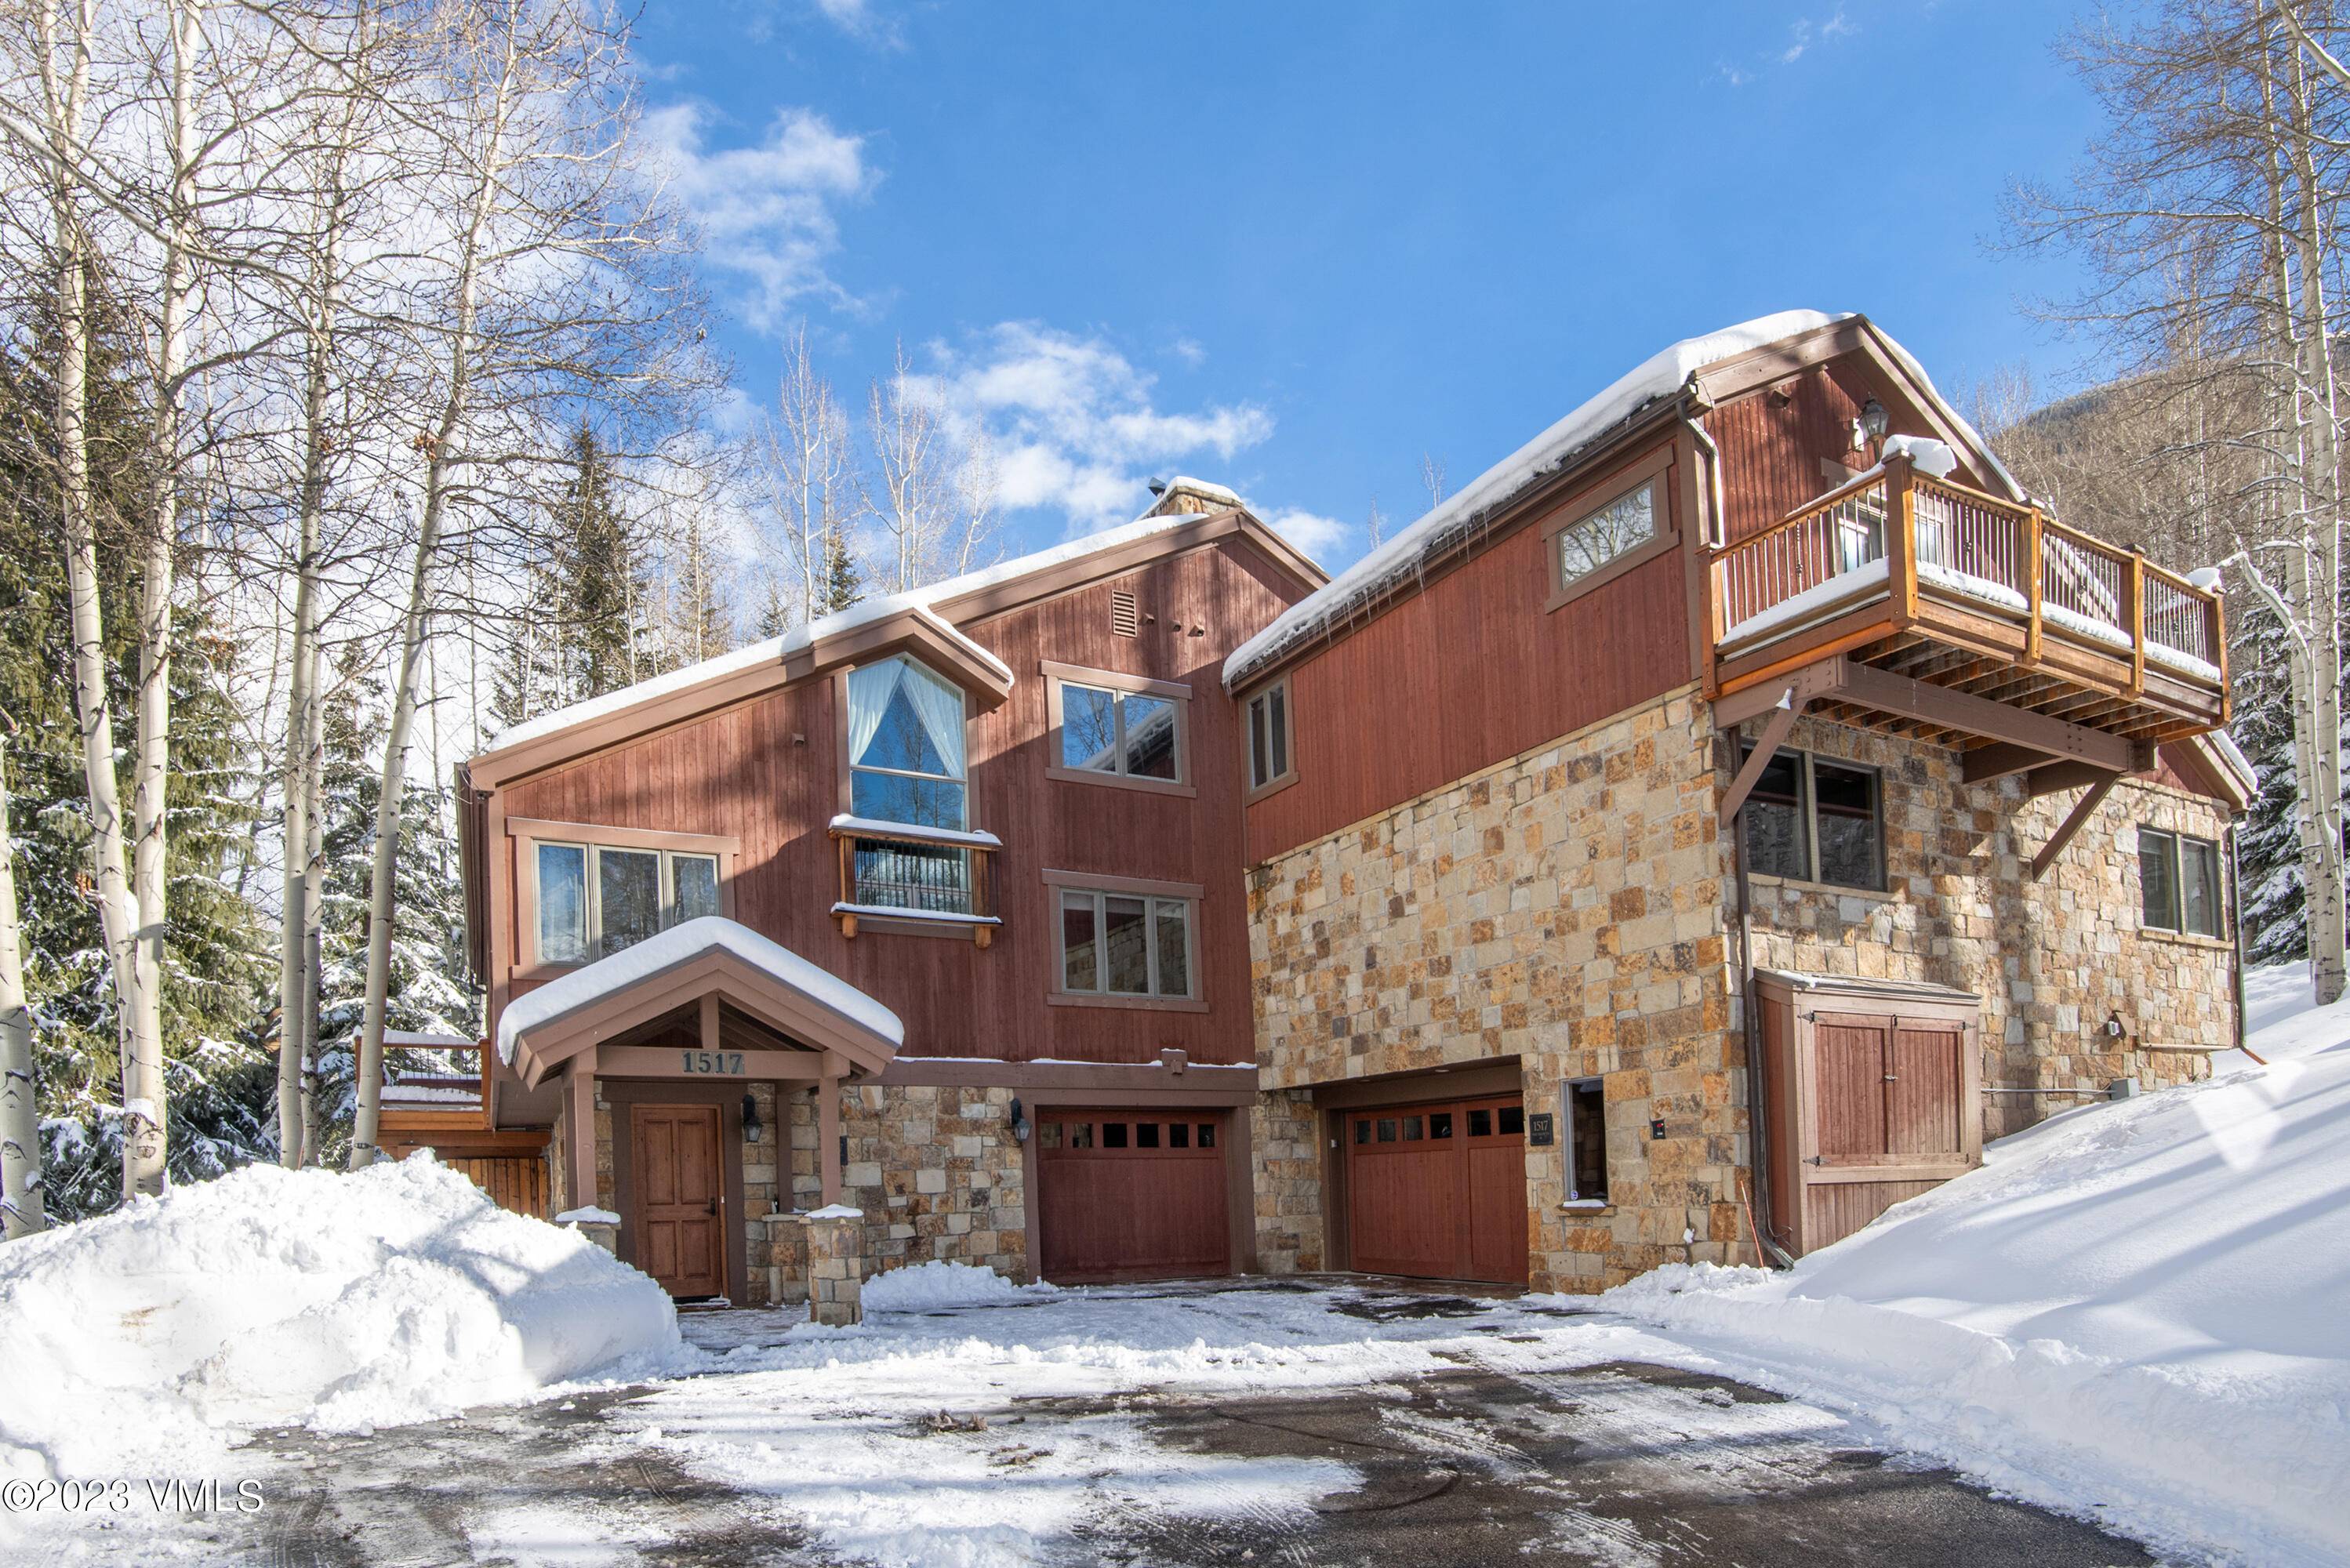 Unique duplex property offered for sale in the prestigious Vail Golf Course neighborhood.